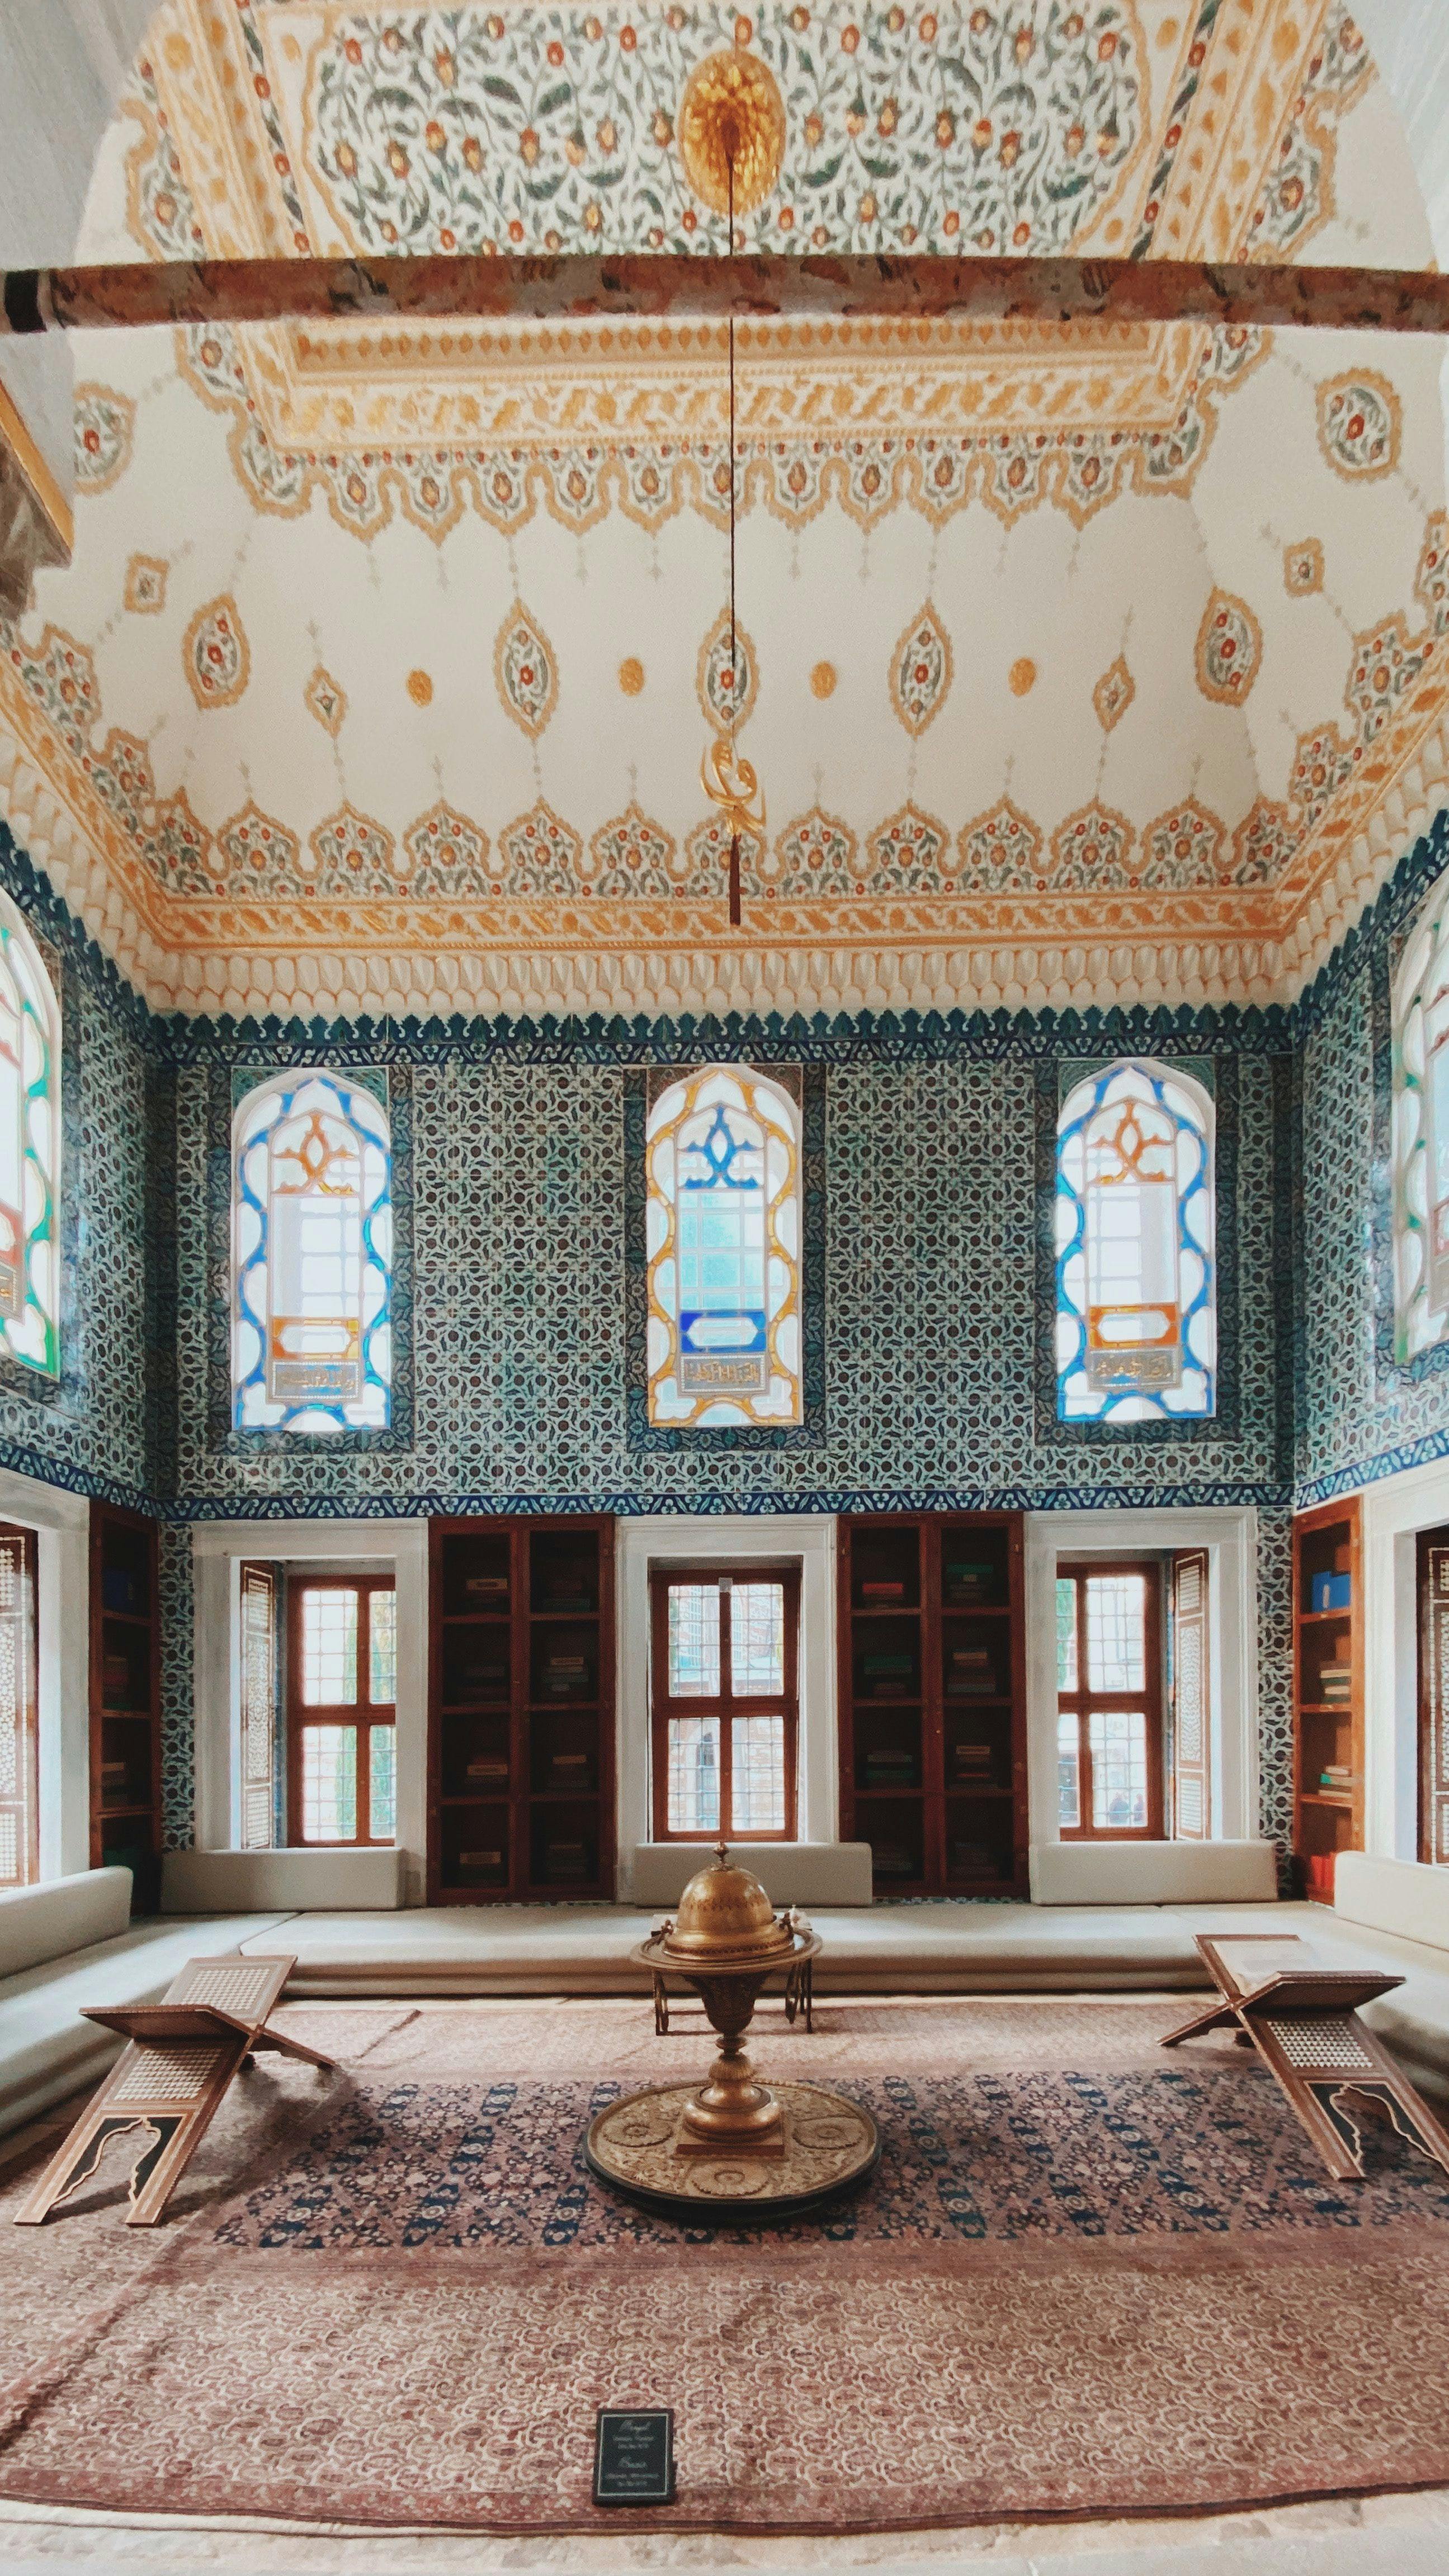 Nicely decorated room inside Topkapi Palace in Turkey.